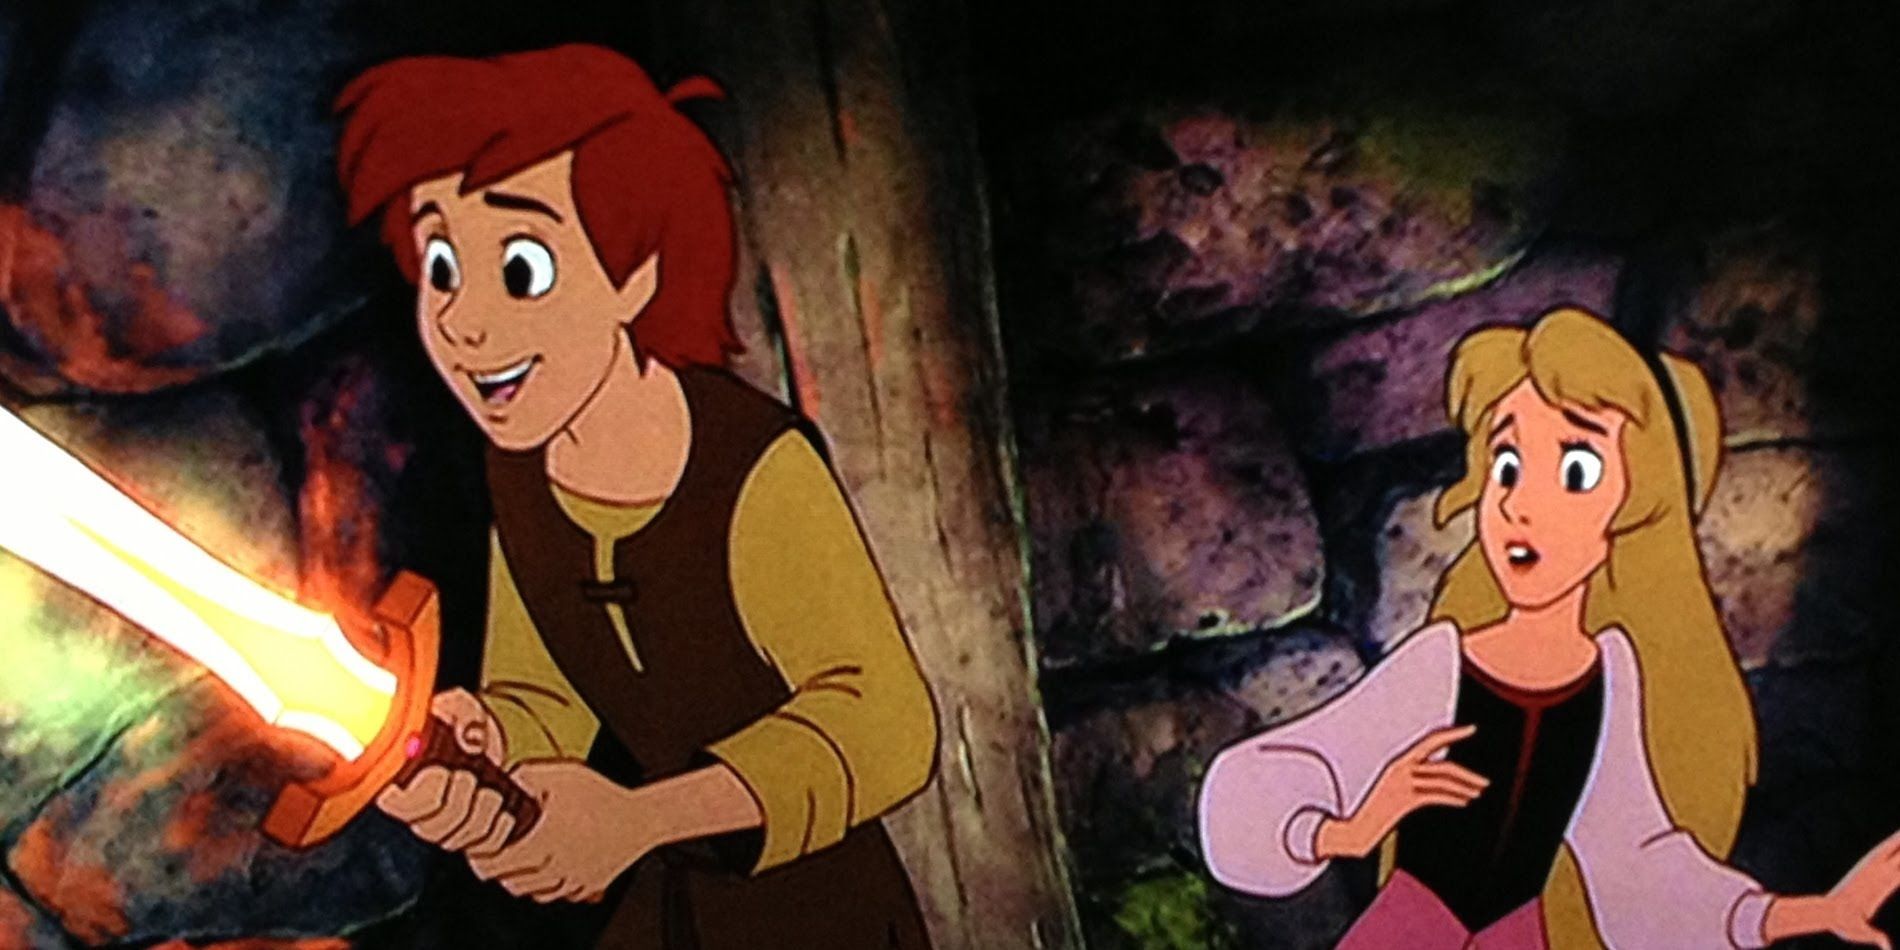 Taran holds a light sword looking fascinated while Eilonwy looks scared in The Black Cauldron